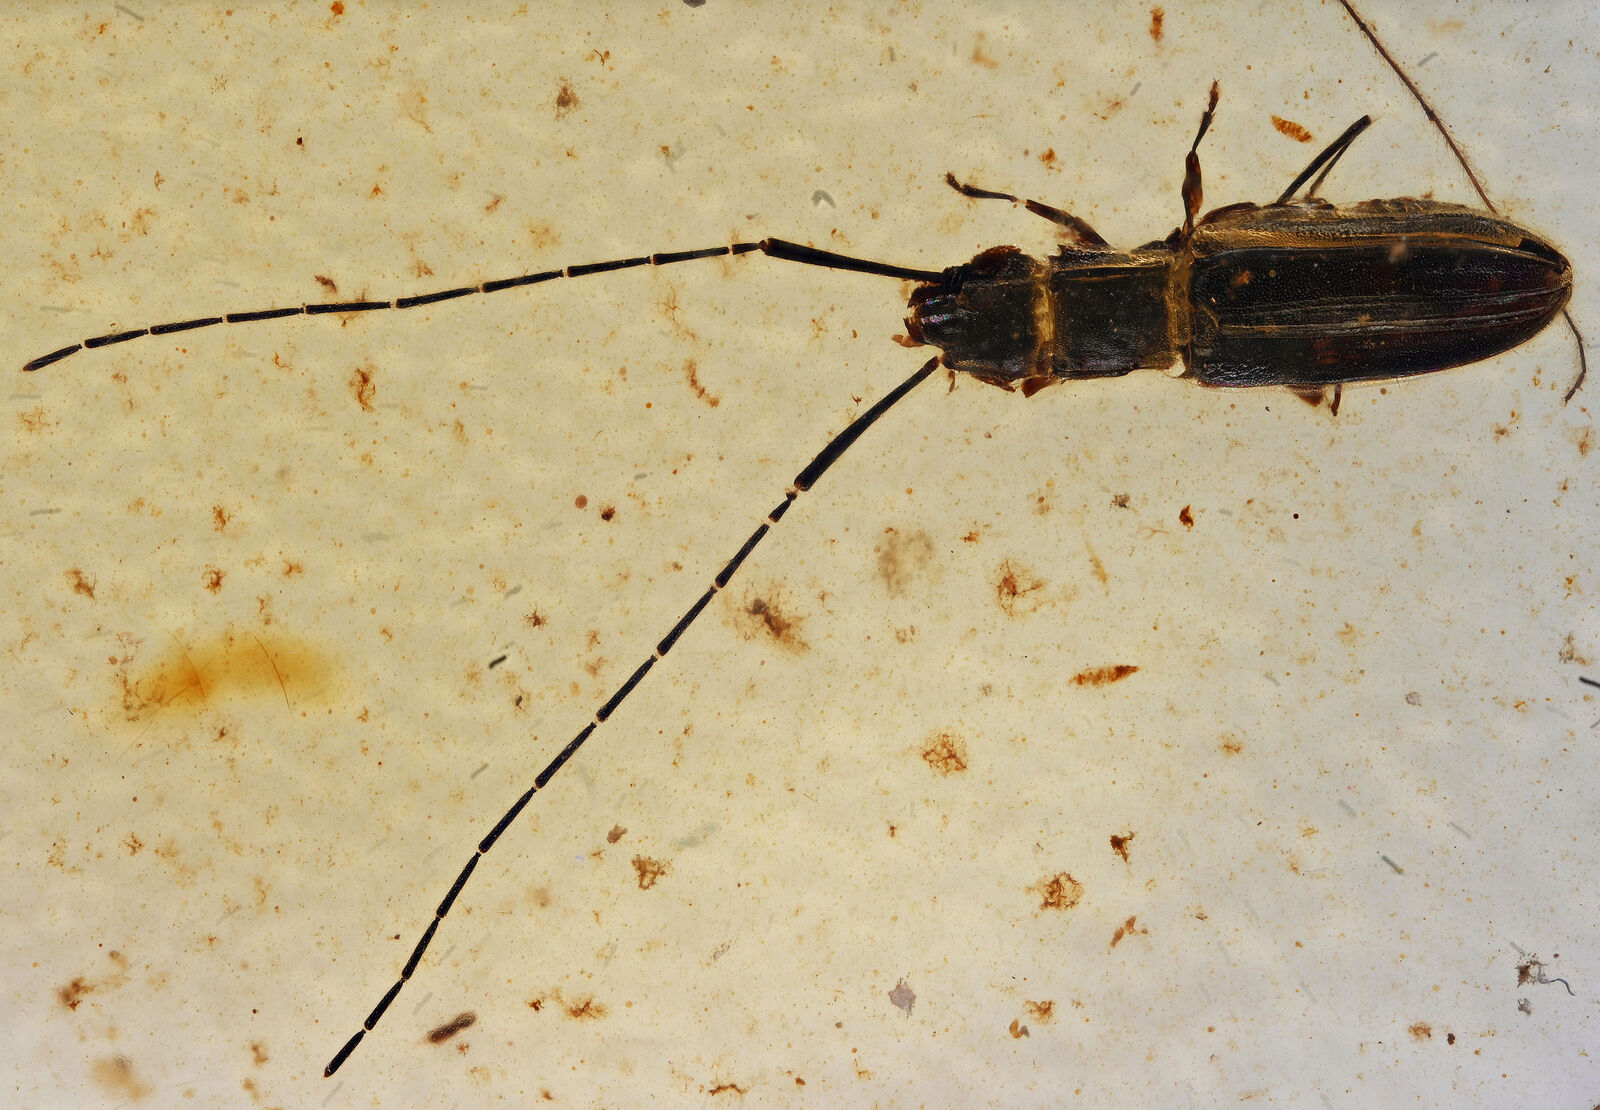 Extremely Rare Silvanidae (Flat Bark Beetle), Fossil inclusion in Burmese Amber